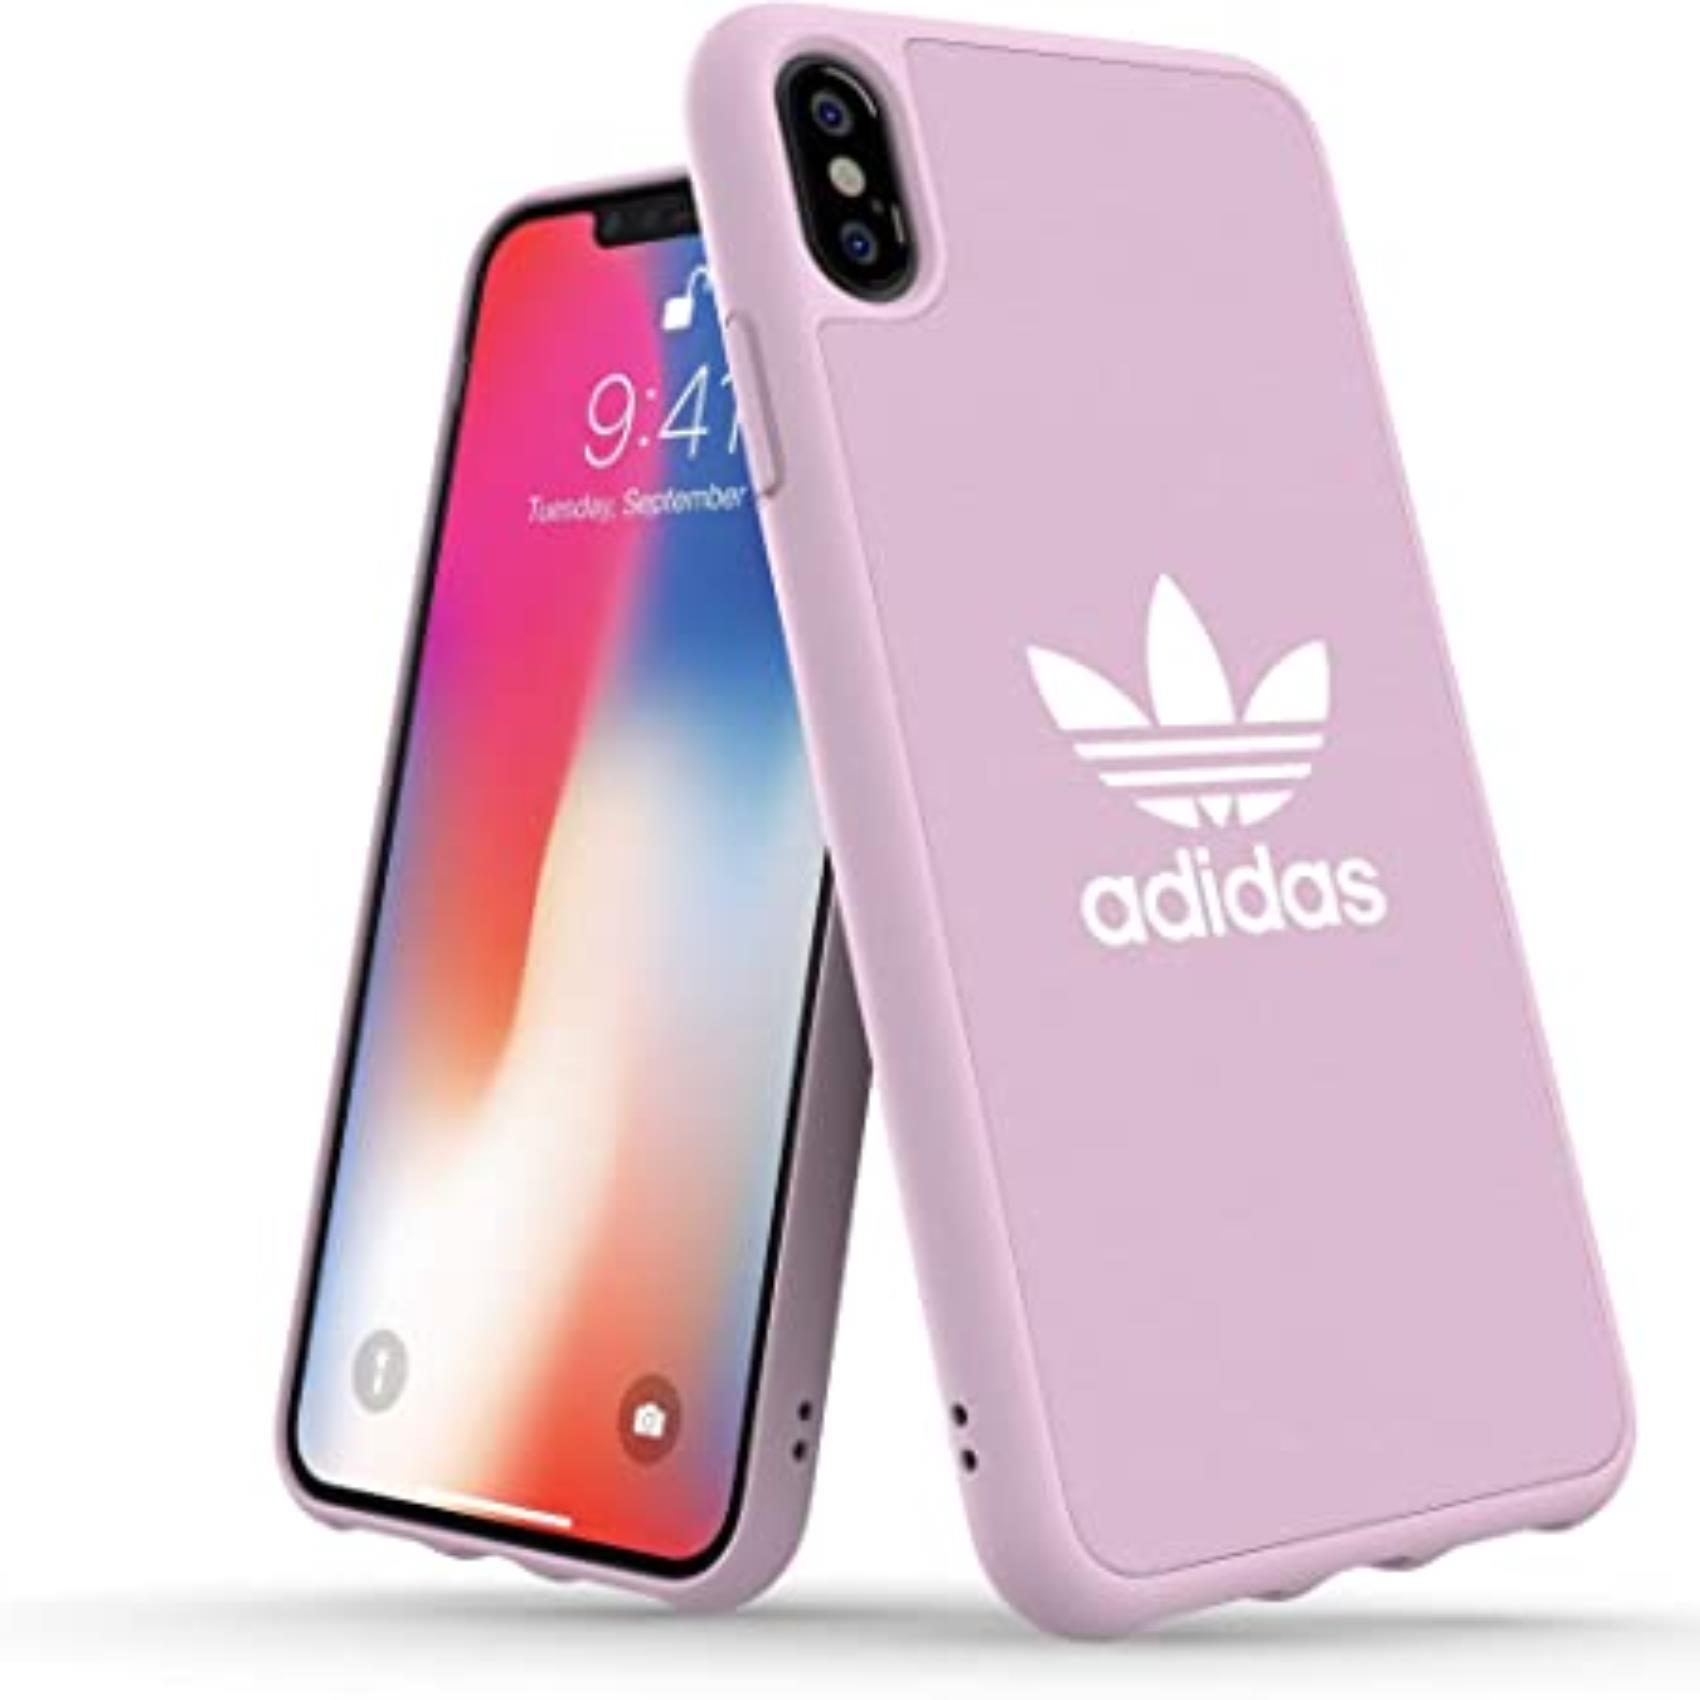 ADICOLOR COVER IPHONE XS MAX PINK